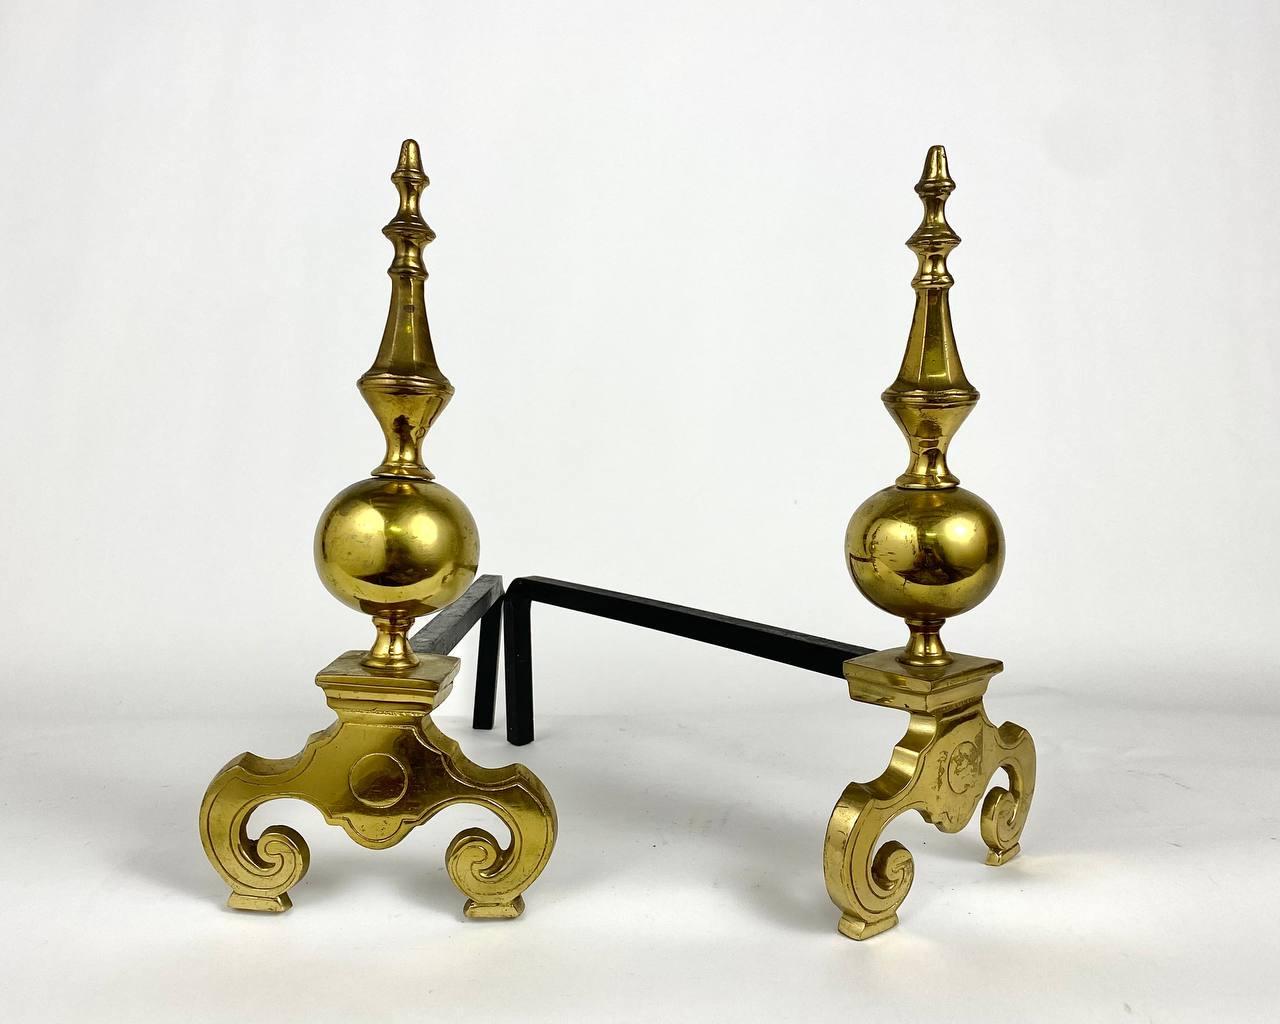 Pair of chased brass and cast iron baroque style mantelpieces from France, circa 1950s.

The ball-shaped uprights with fleurons enhance the fleur-de-lys patterned legs.

These elegant and practical andirons allow air to reach the fire from all sides